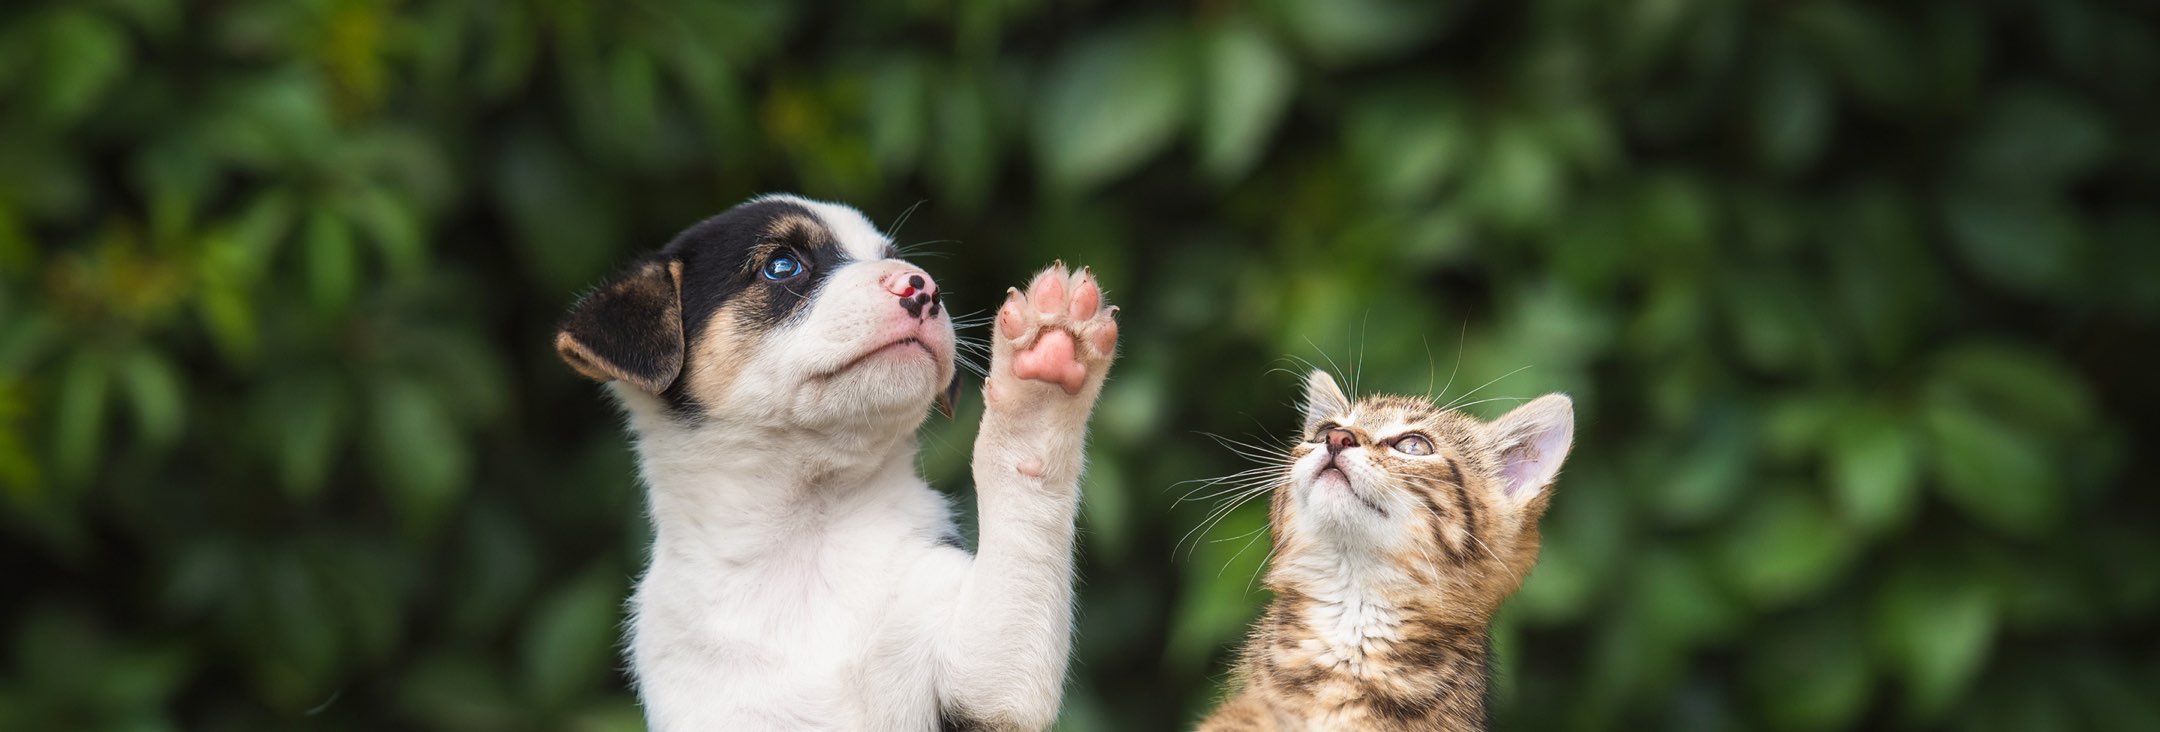 A puppy and a cat looking up